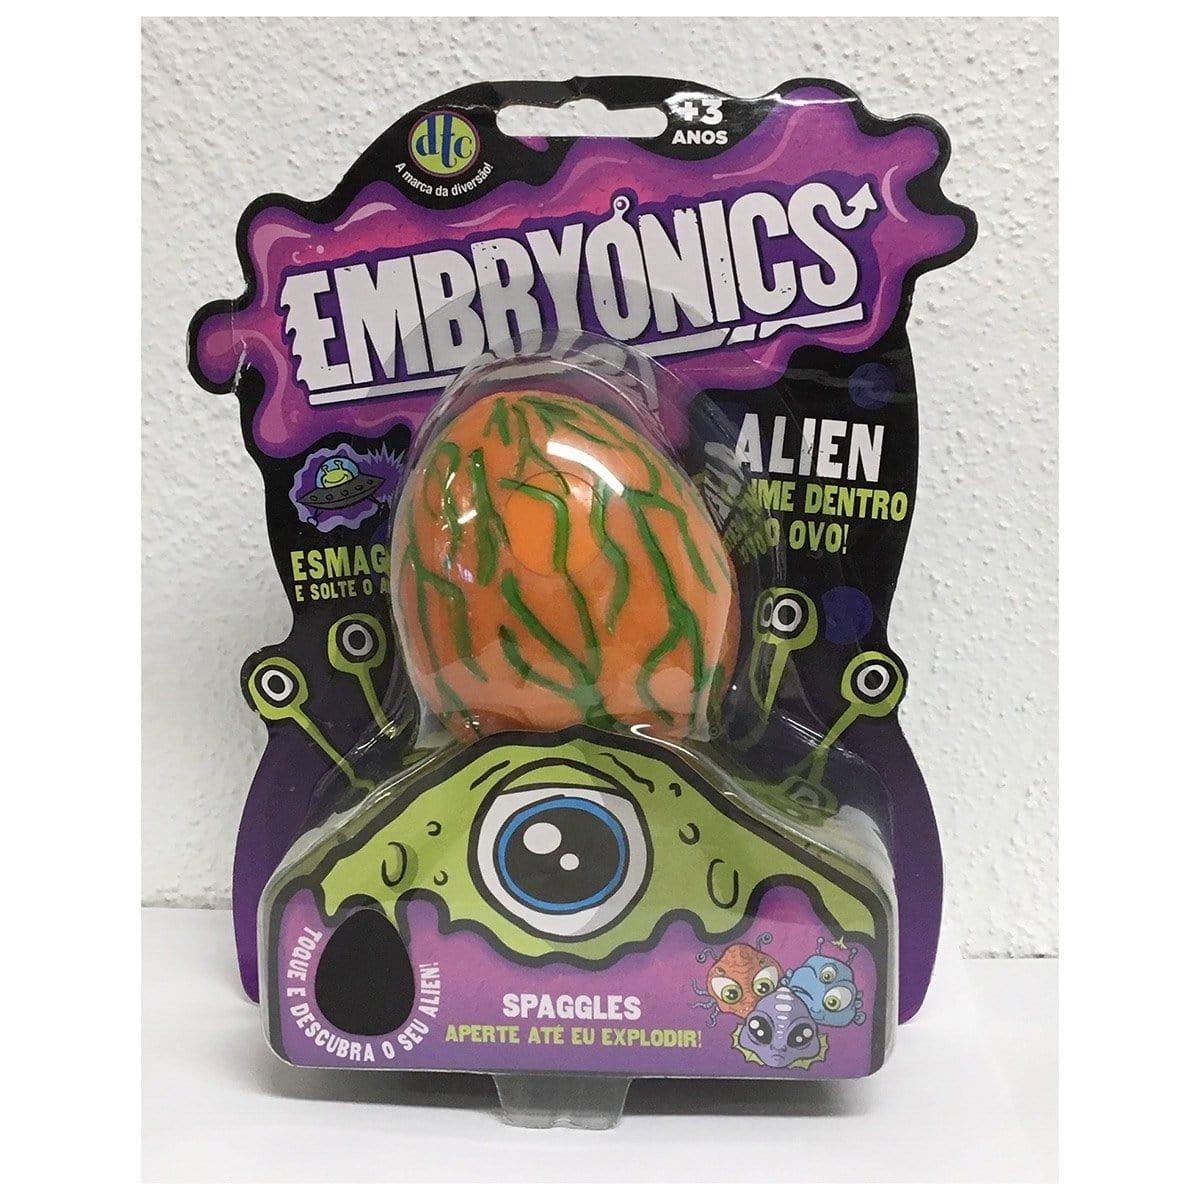 Buy Kids Birthday Embryonics mystery toy - Assortment sold at Party Expert